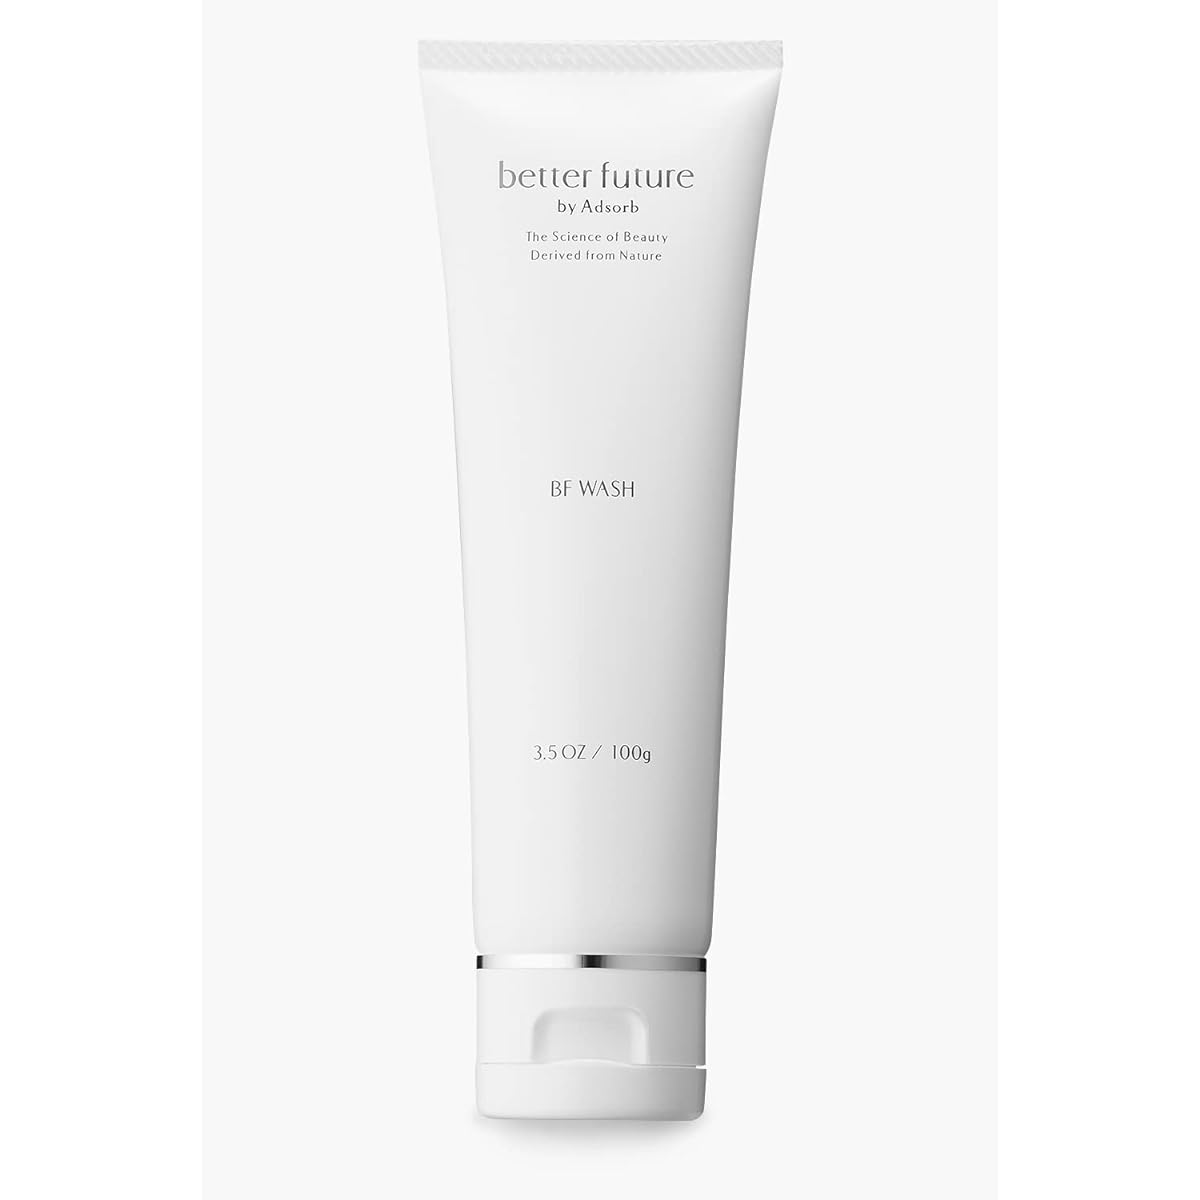 [Facial cleanser containing ostrich antibody ingredients] (BF Wash) Contains natural clay, thick foam, dirty pores, oily skin, dry skin, normal skin